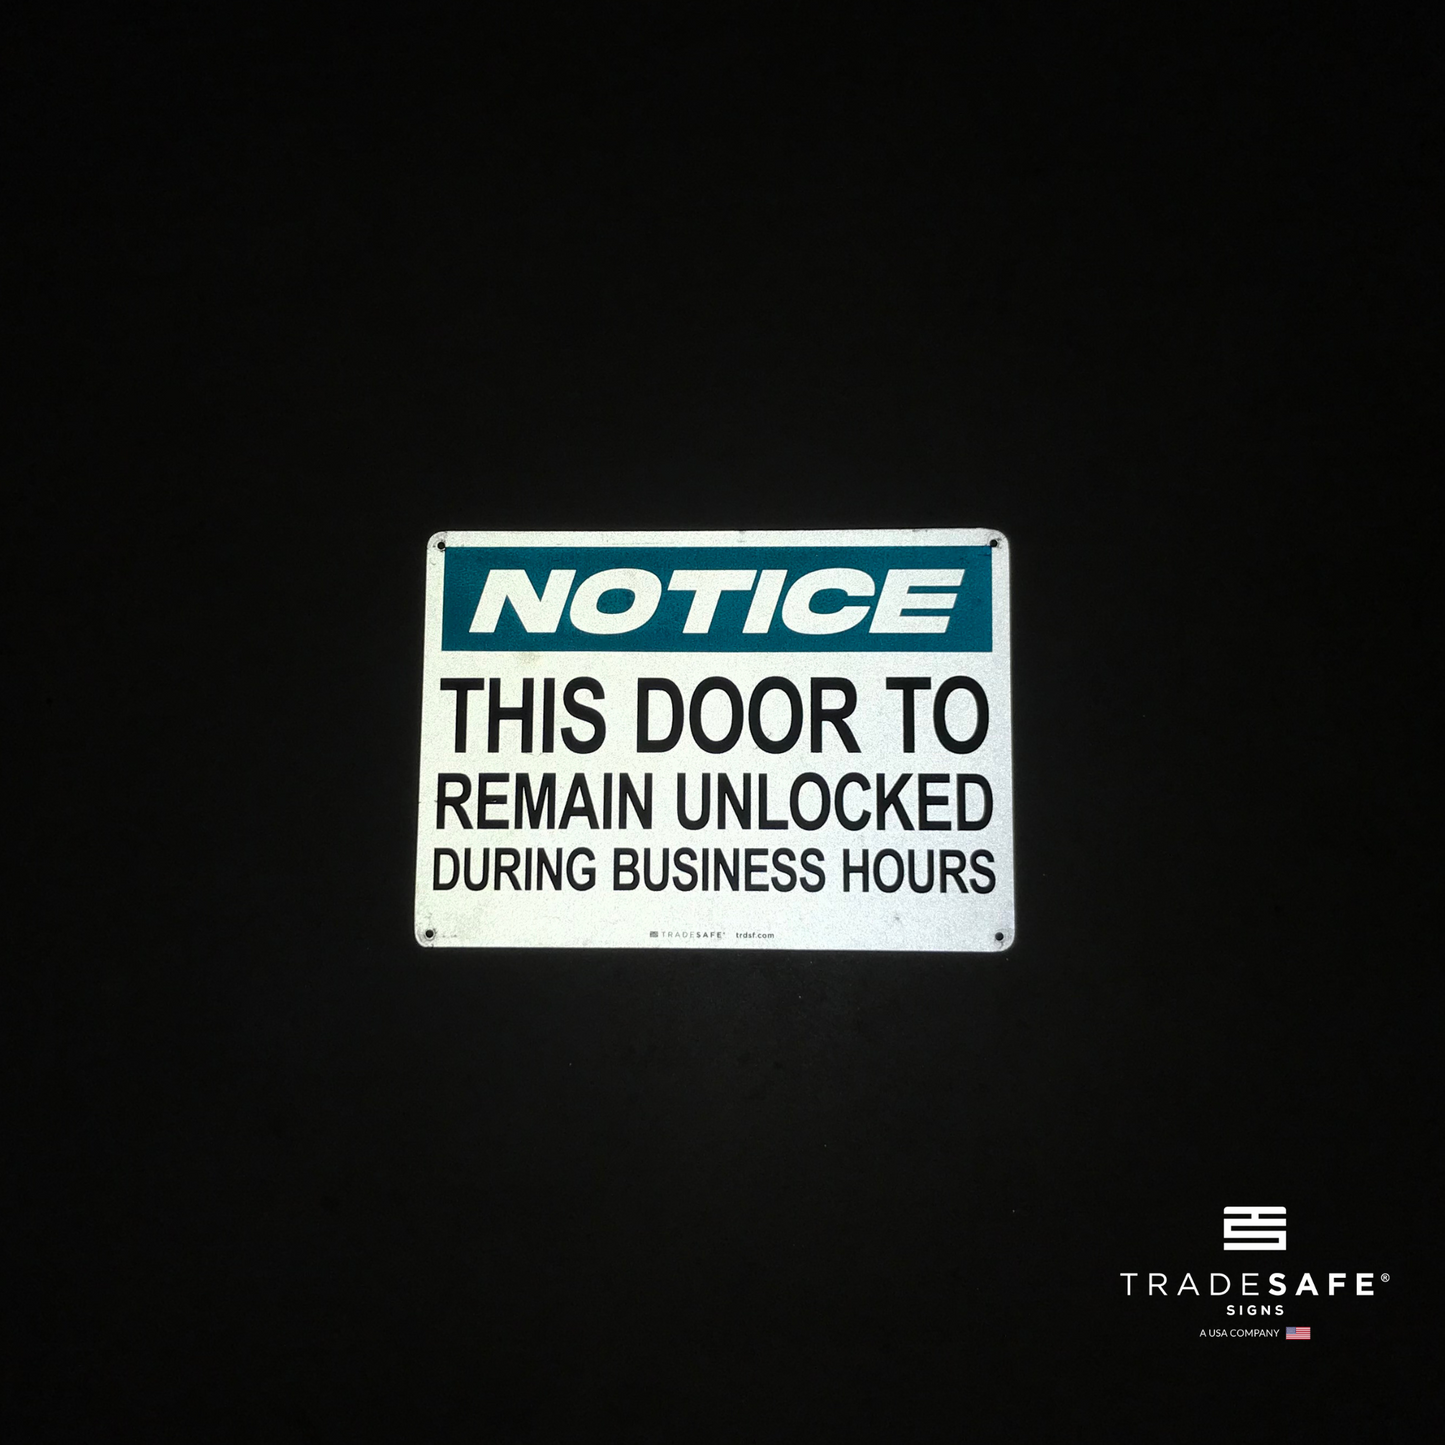 reflective attribute of facility sign on black background